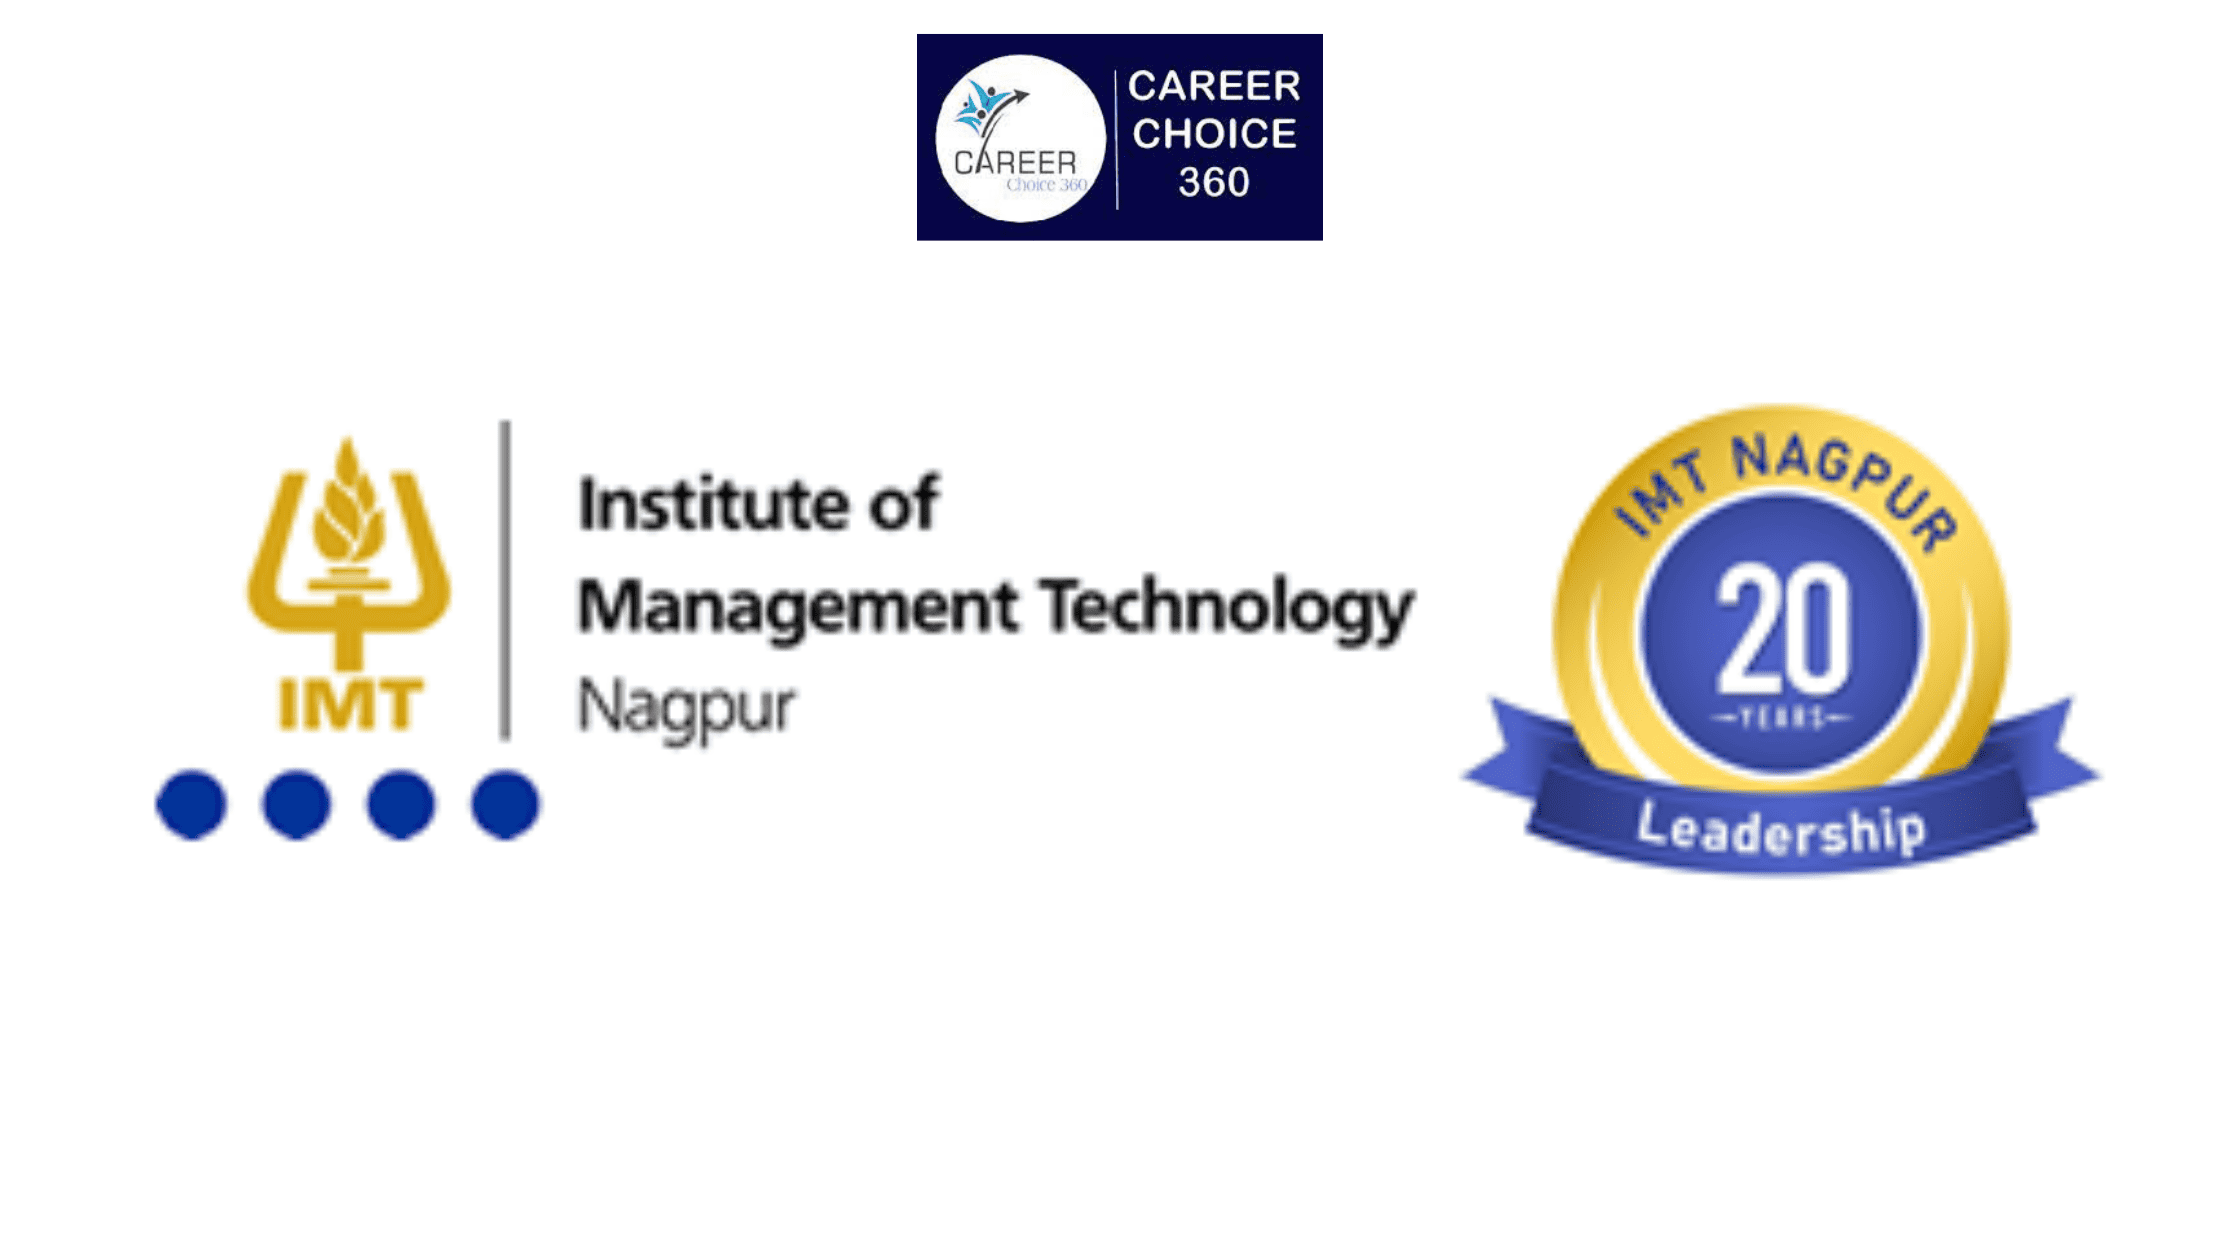 You are currently viewing Institute of Management Technology Nagpur ( IMT Nagpur ) : Course & Fees, Admission procedure, Rankings, and Placements